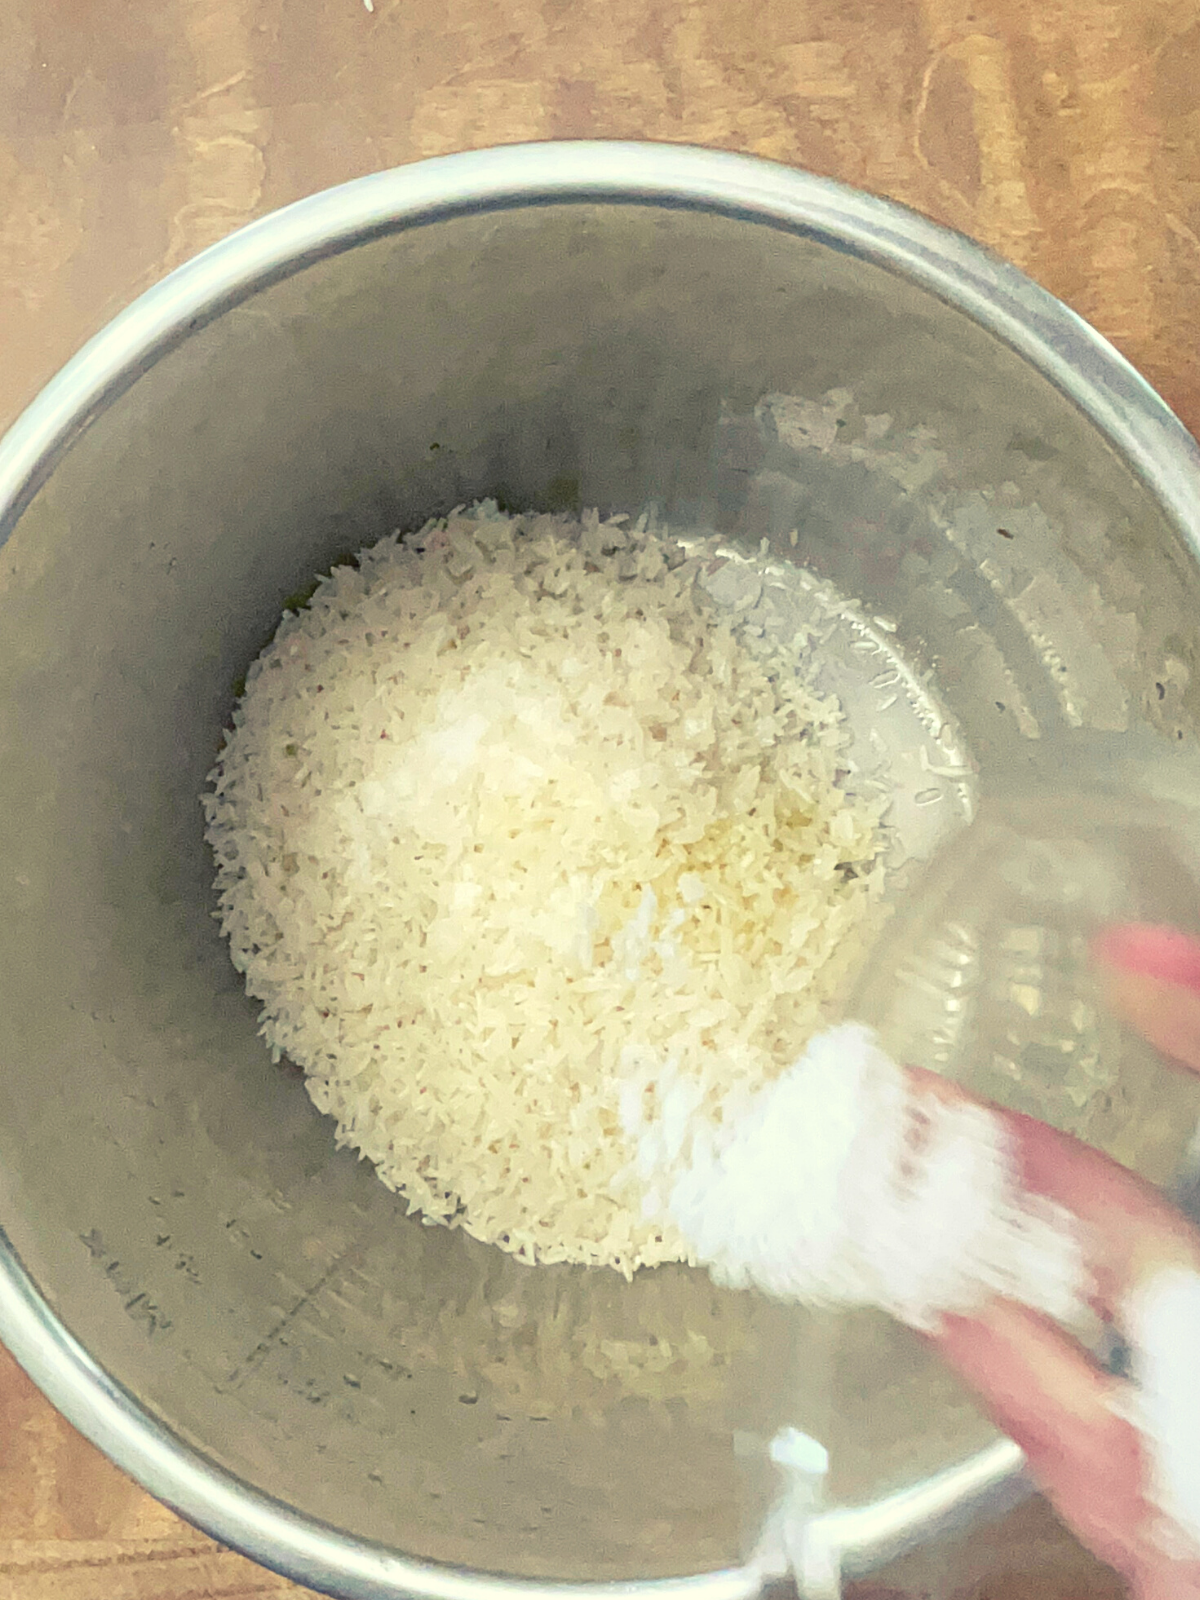 Adding table salt to the Instant Pot of rice and oil.